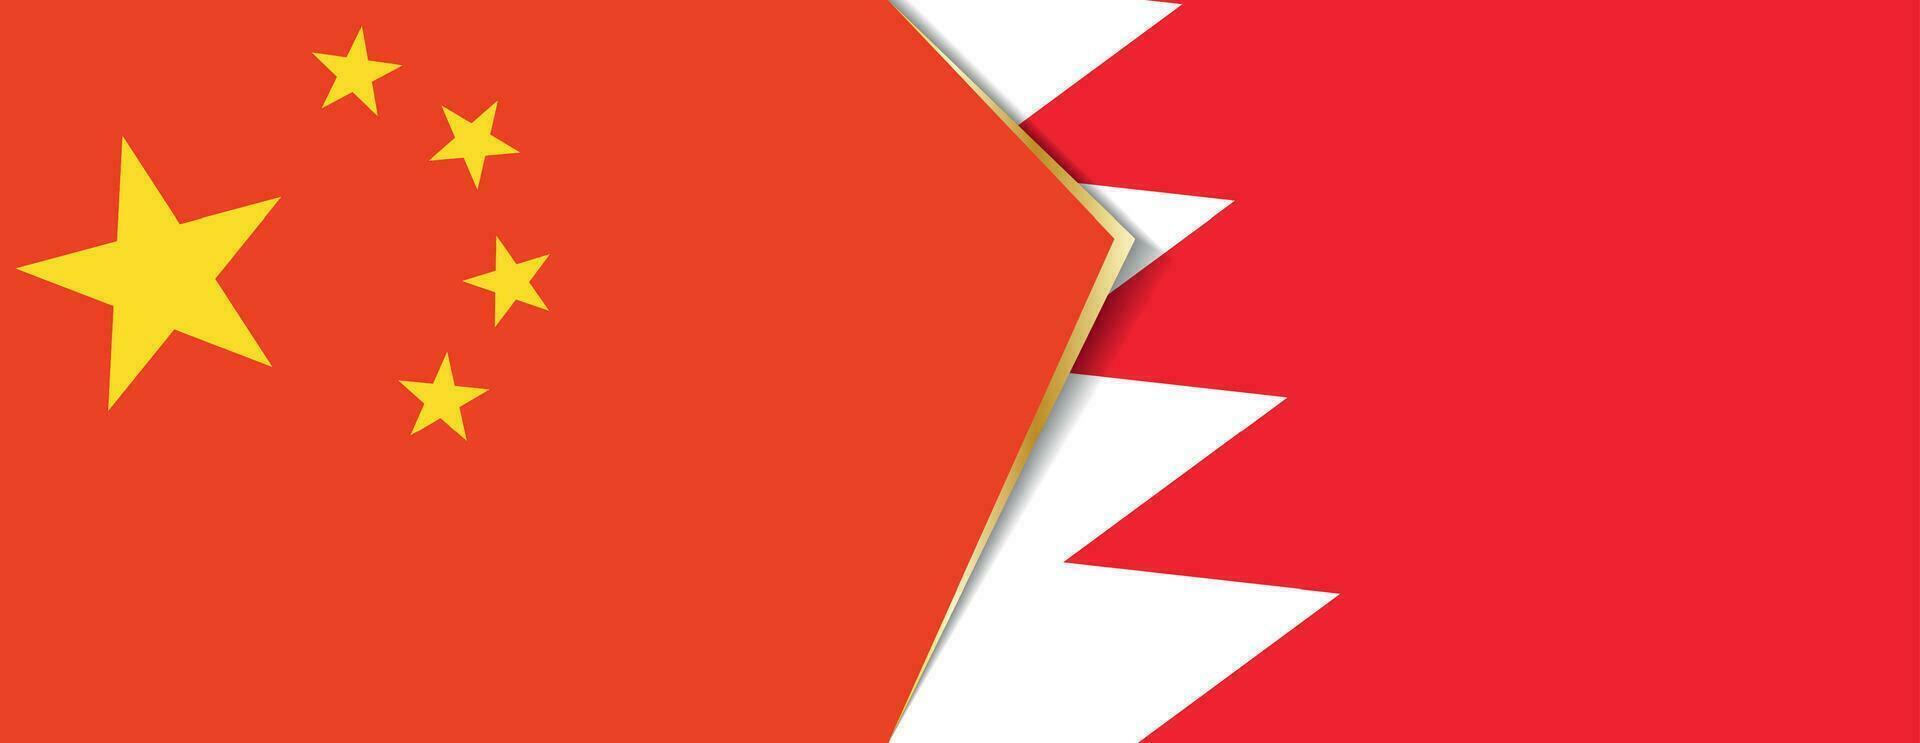 China and Bahrain flags, two vector flags.